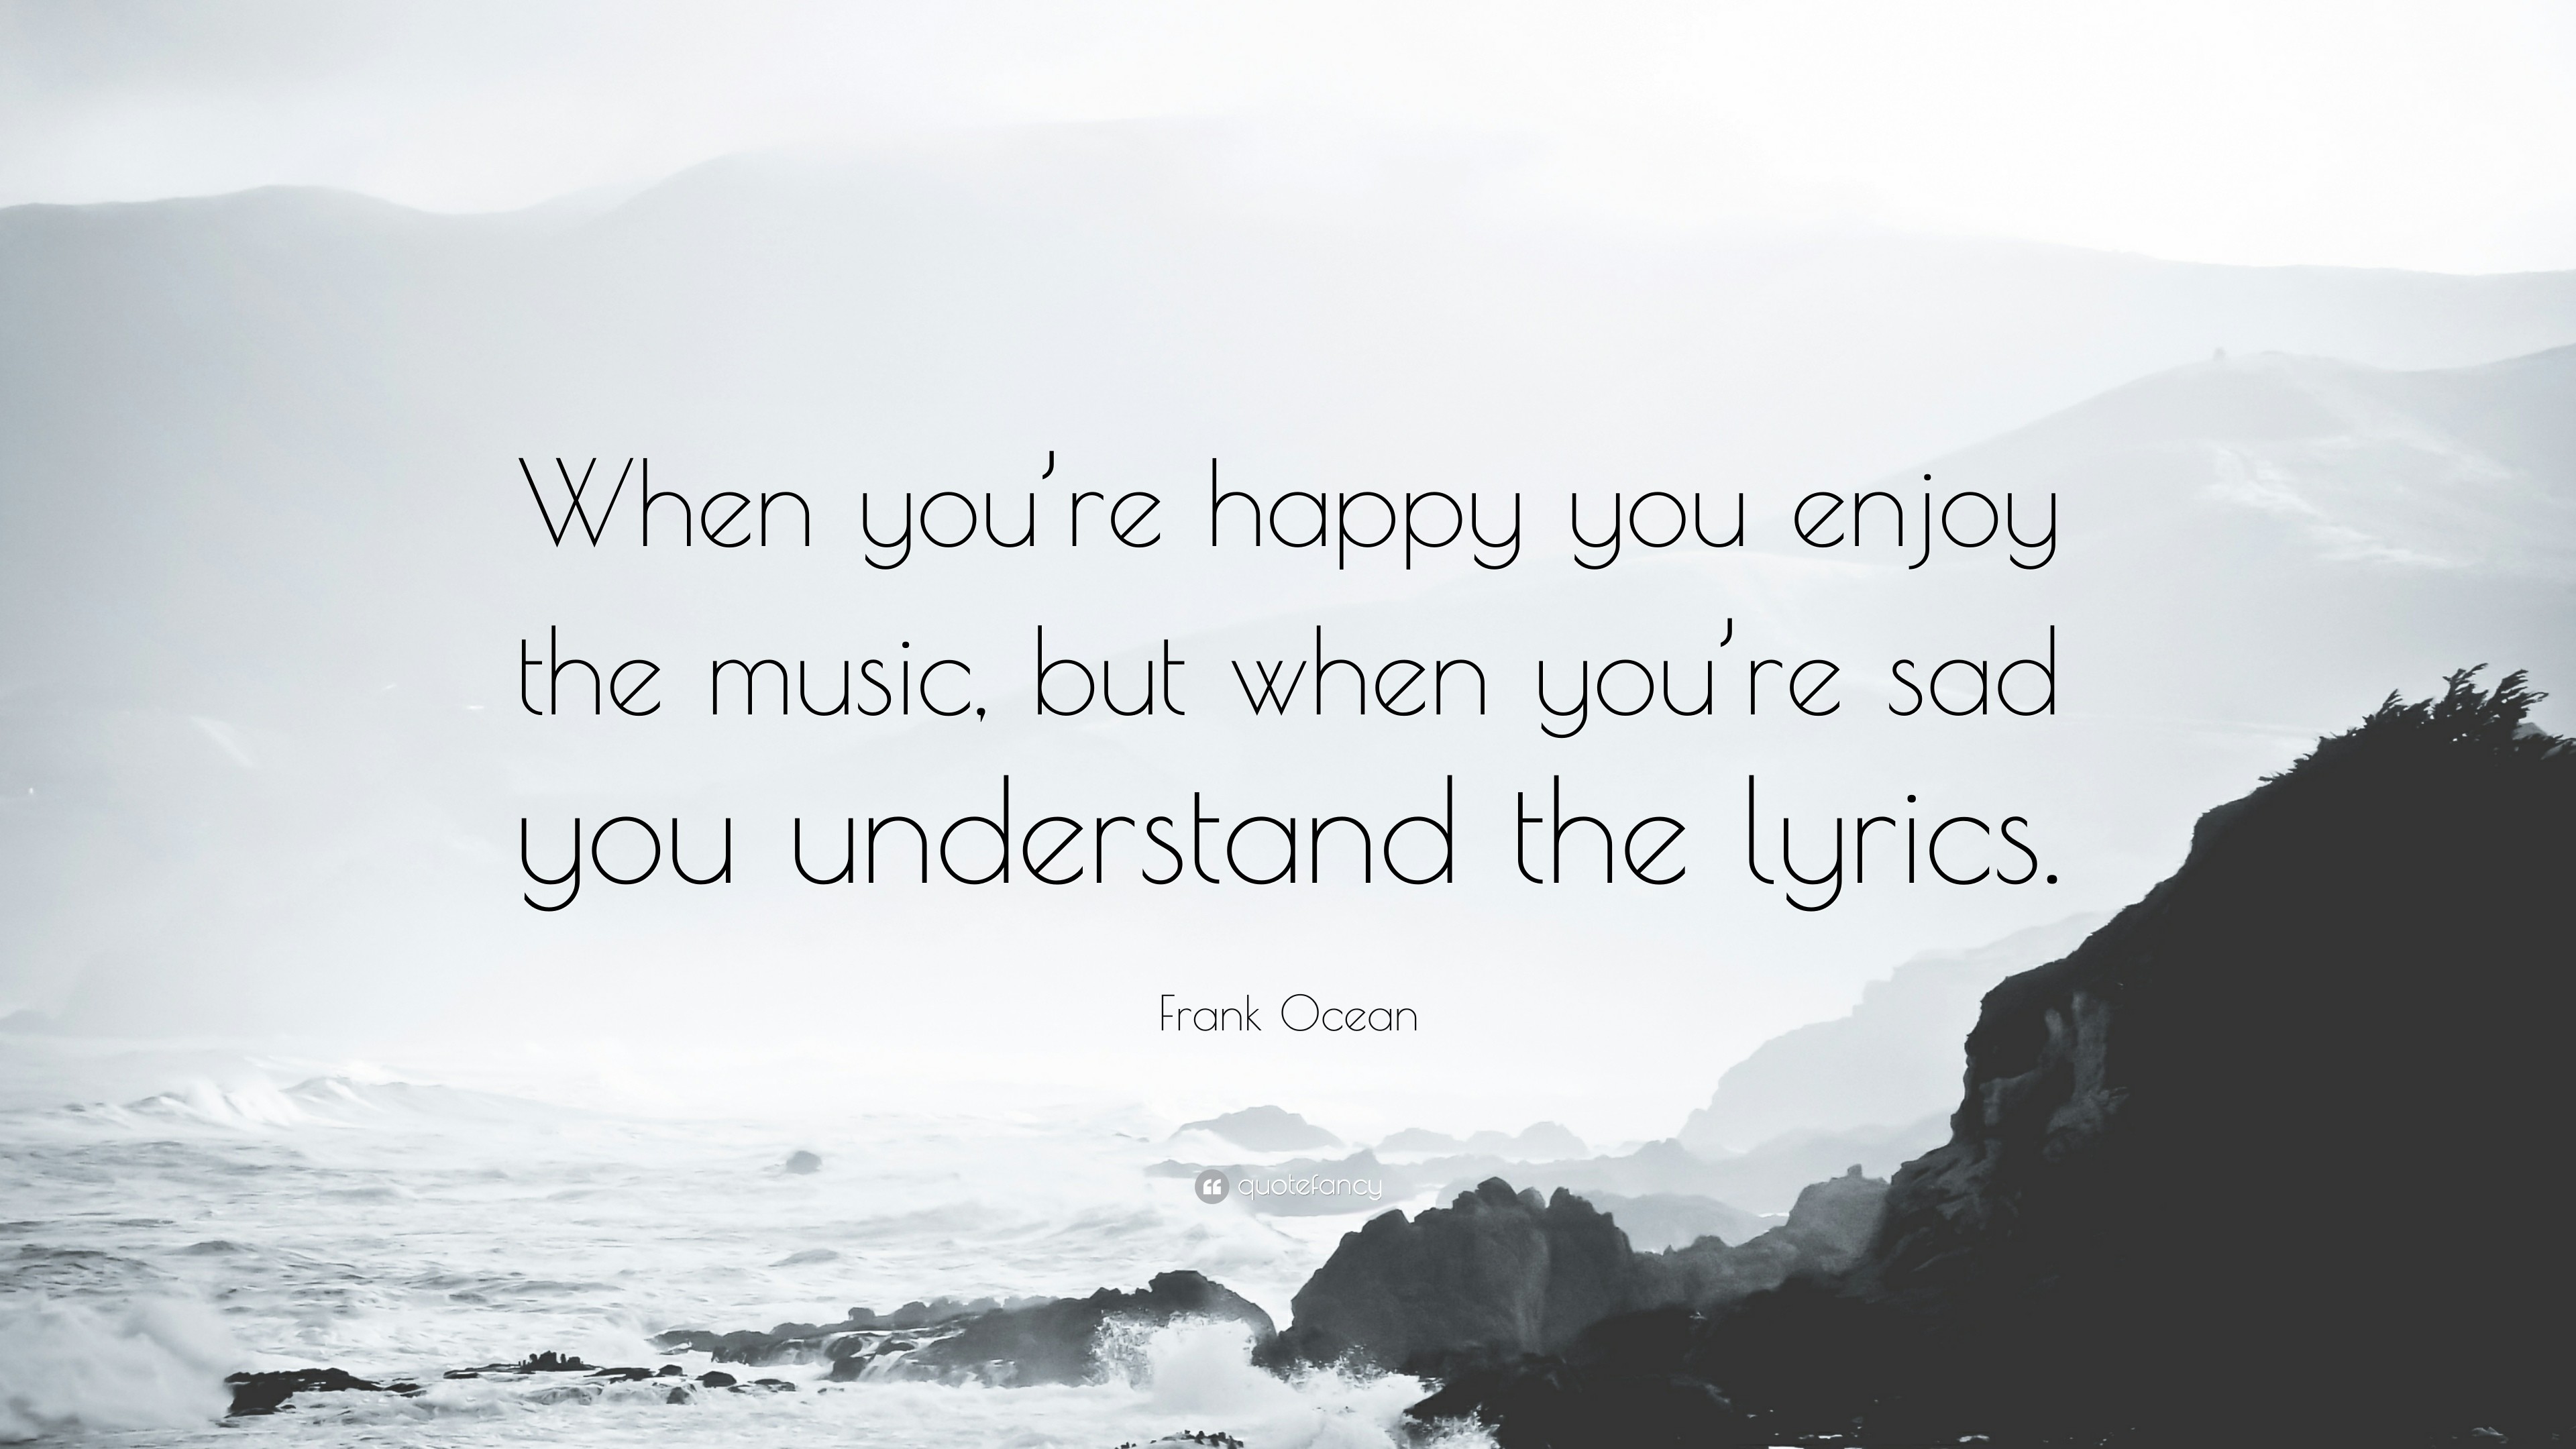 3840x2160 Frank Ocean Quote: “When you're happy you enjoy the music, but